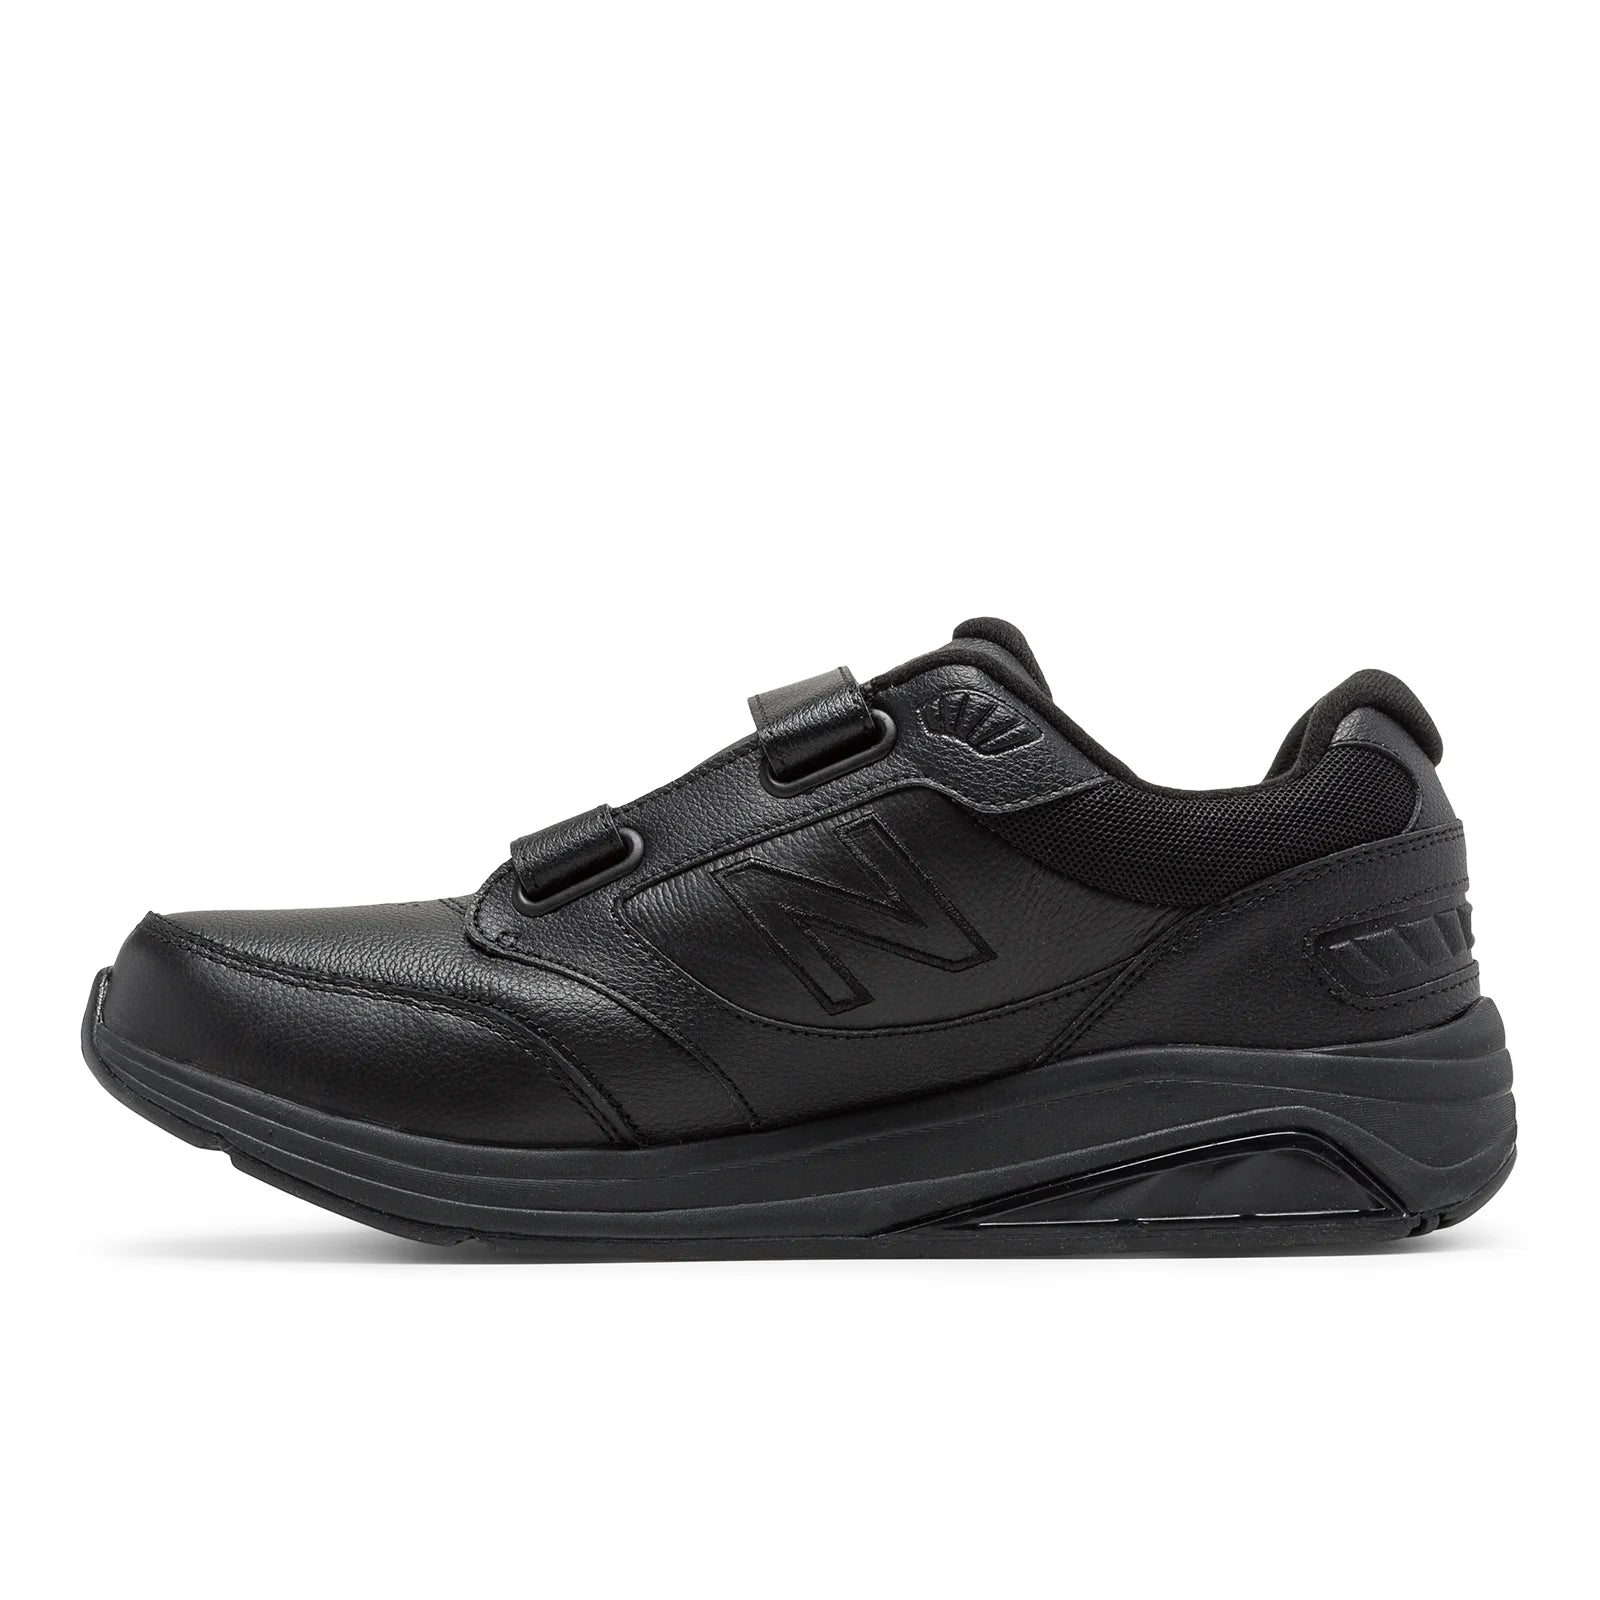 New Balance Men's Hook and Loop Leather 928v3 Walking Shoes in BLACK